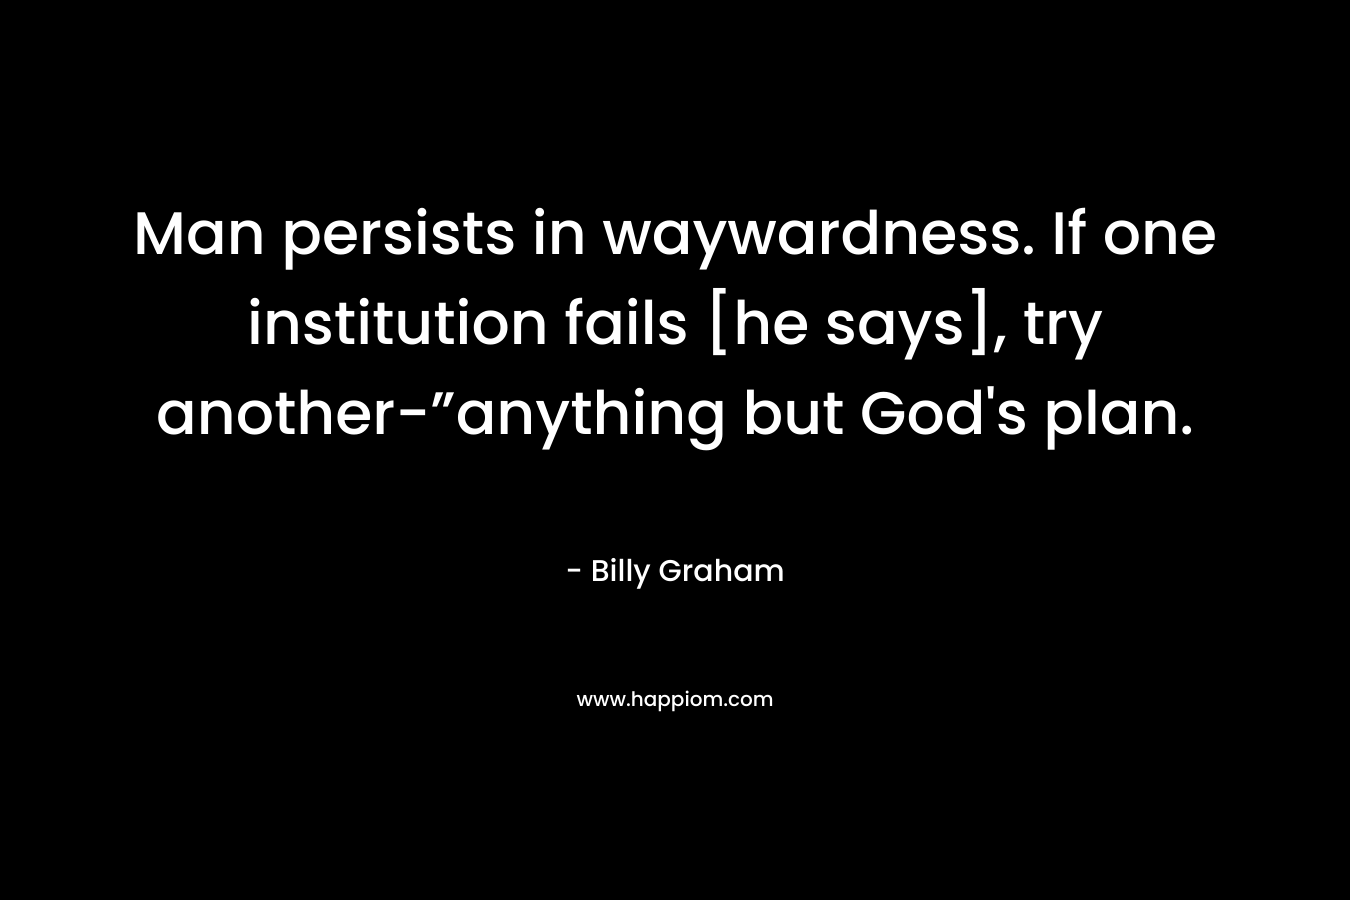 Man persists in waywardness. If one institution fails [he says], try another-”anything but God's plan.